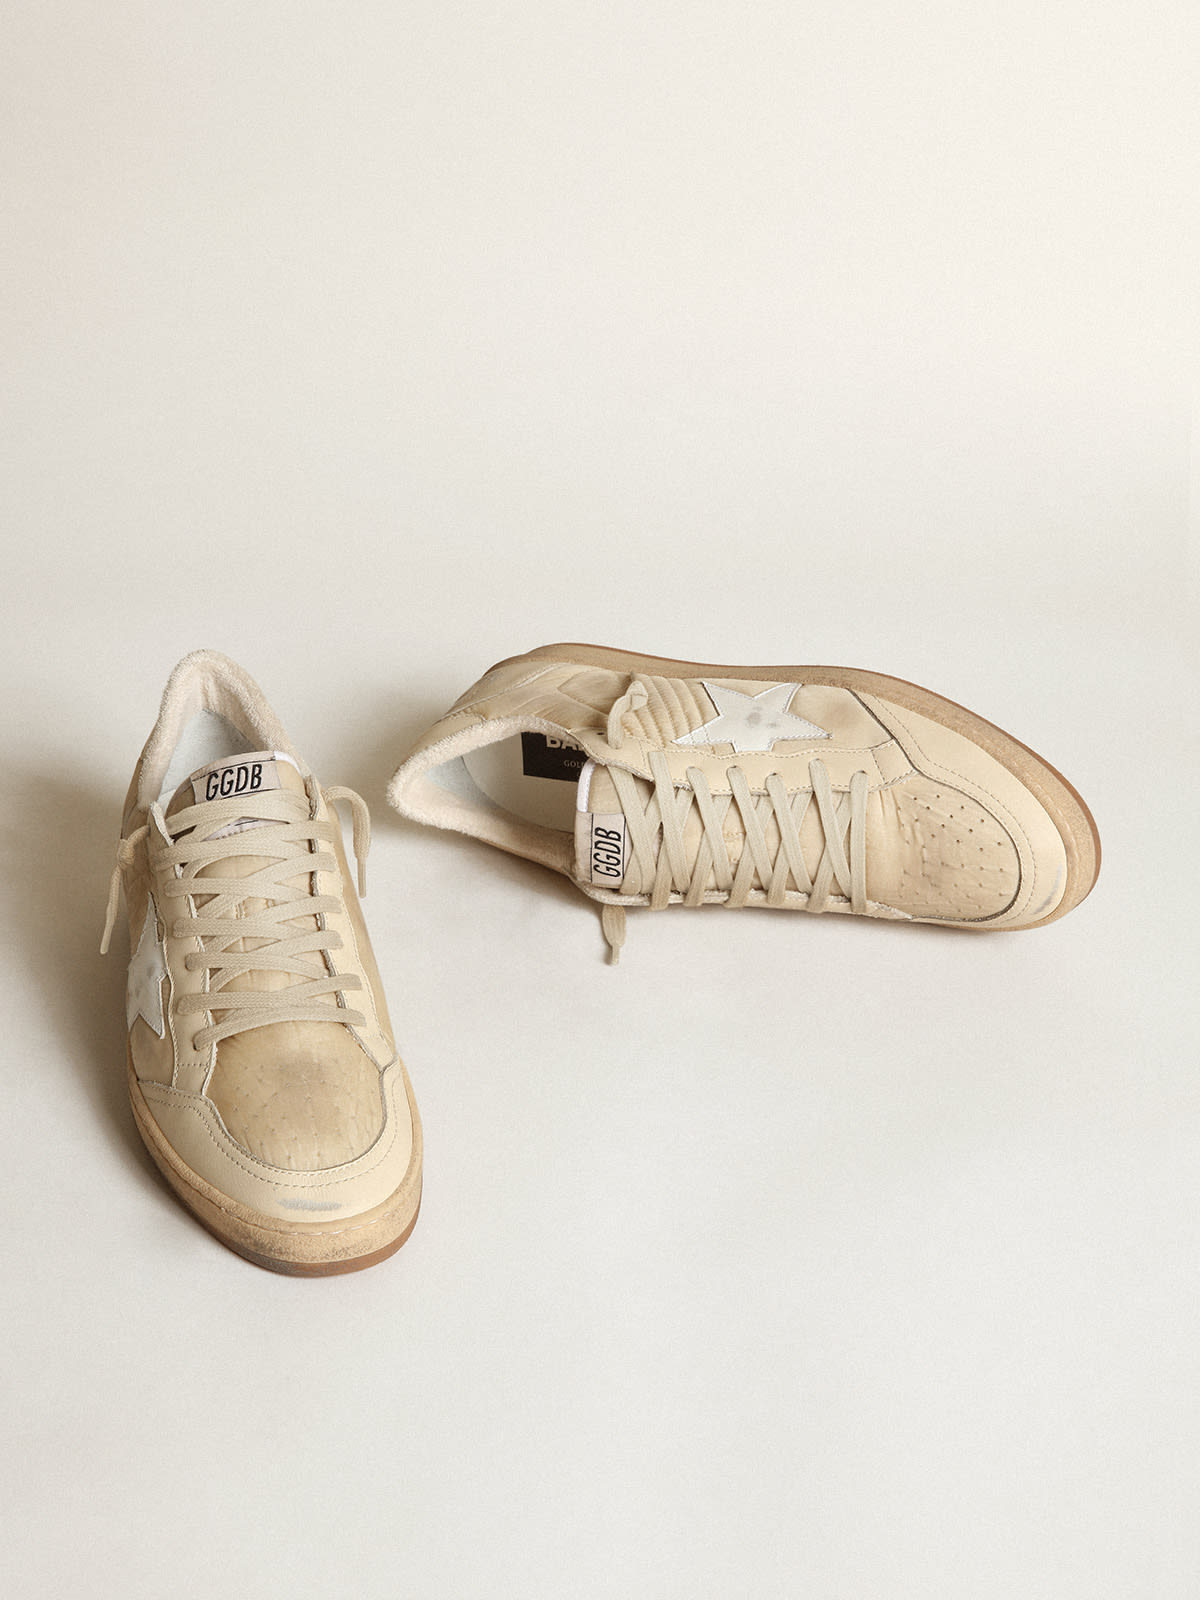 Golden Goose - Men's Ball Star in white nylon with white star and heel tab in 